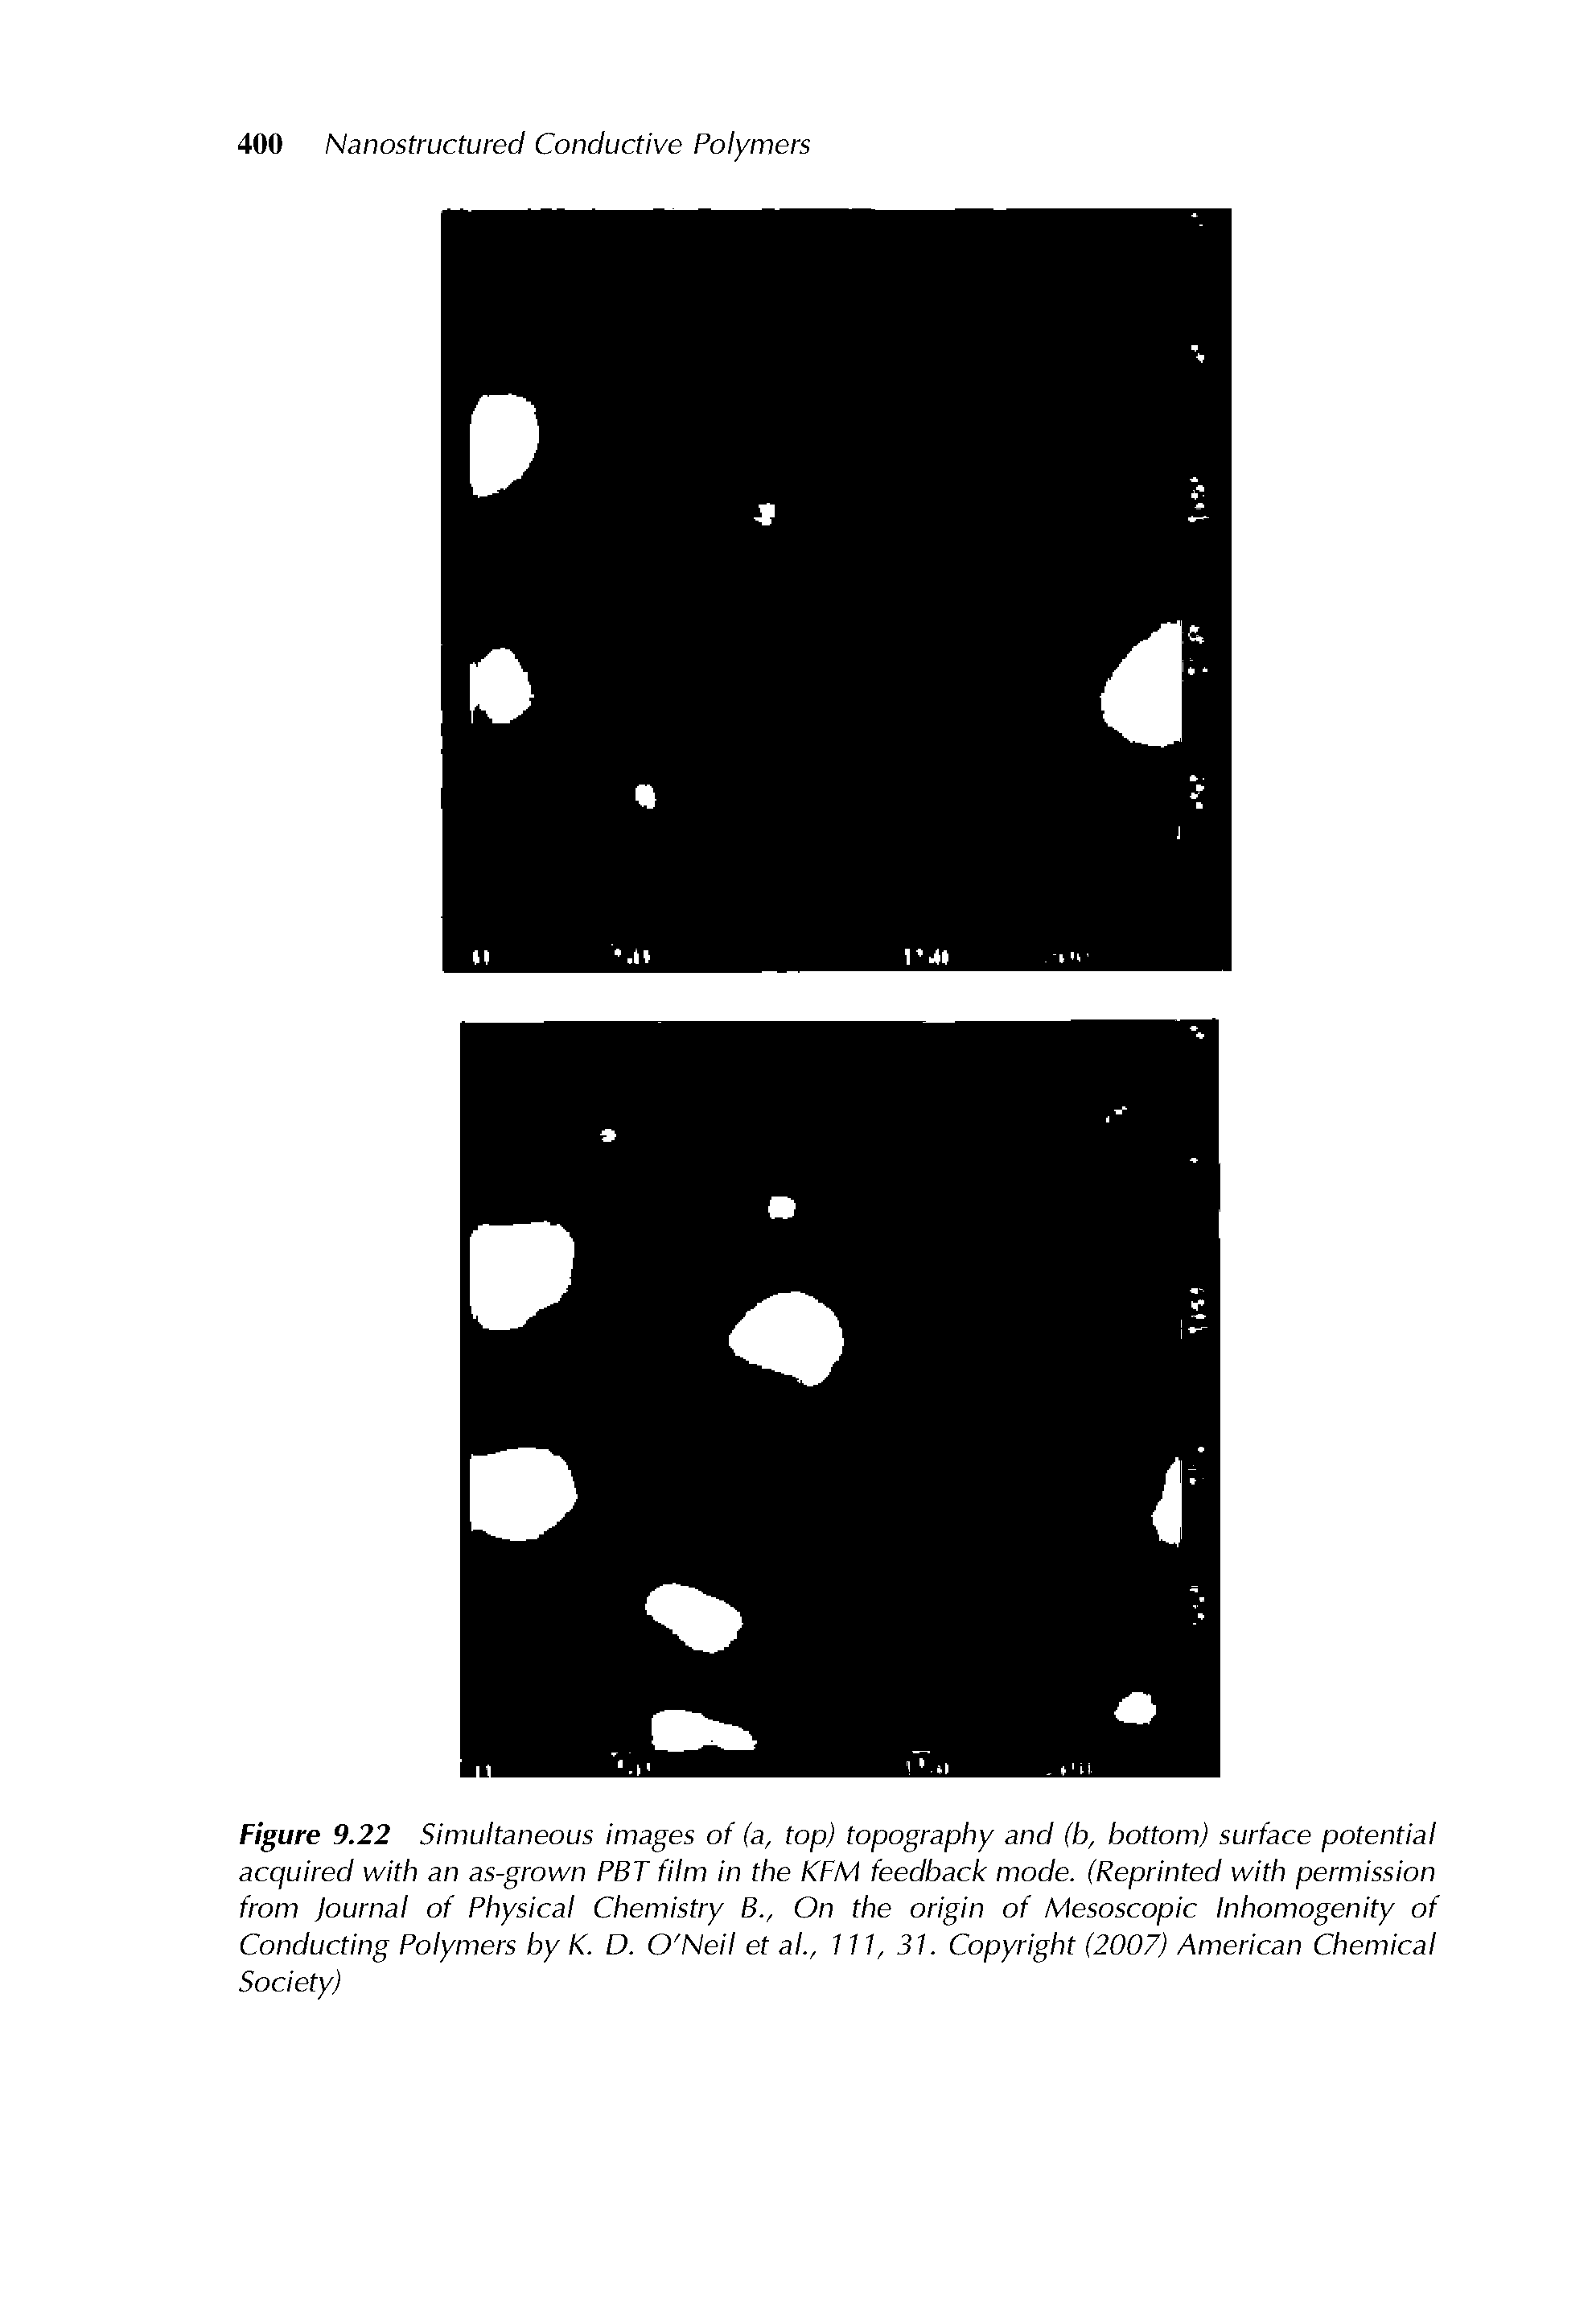 Figure 9.22 Simultaneous images of (a, top) topography and (b, bottom) surface potential acquired with an as-grown PBT film in the KFM feedback mode. (Reprinted with permission from Journal of Physical Chemistry B., On the origin of Mesoscopic Inhomogenity of Conducting Polymers by K. D. O Neil et al., ill, 31. Copyright (2007) American Chemical Society)...